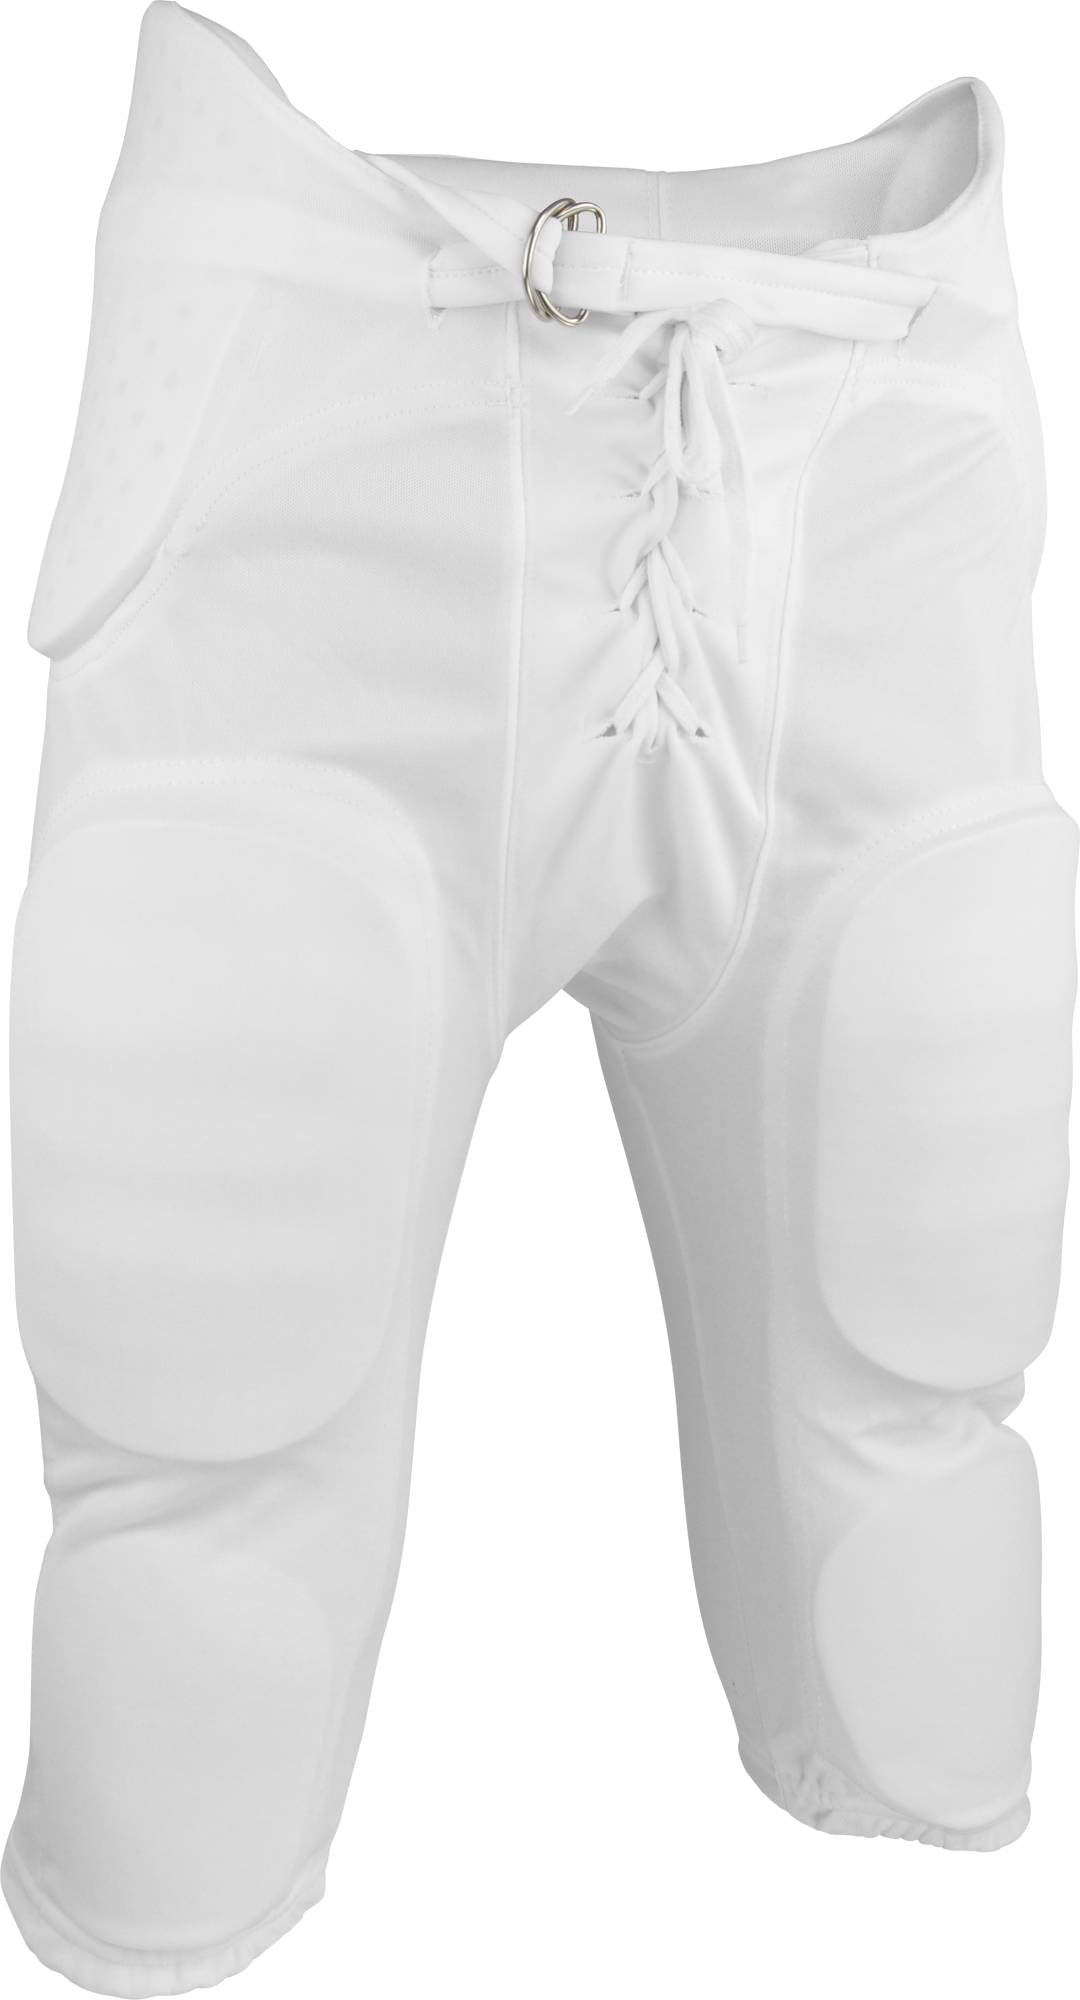 New Sports Unlimited Double Knit Youth Integrated Football Pants 